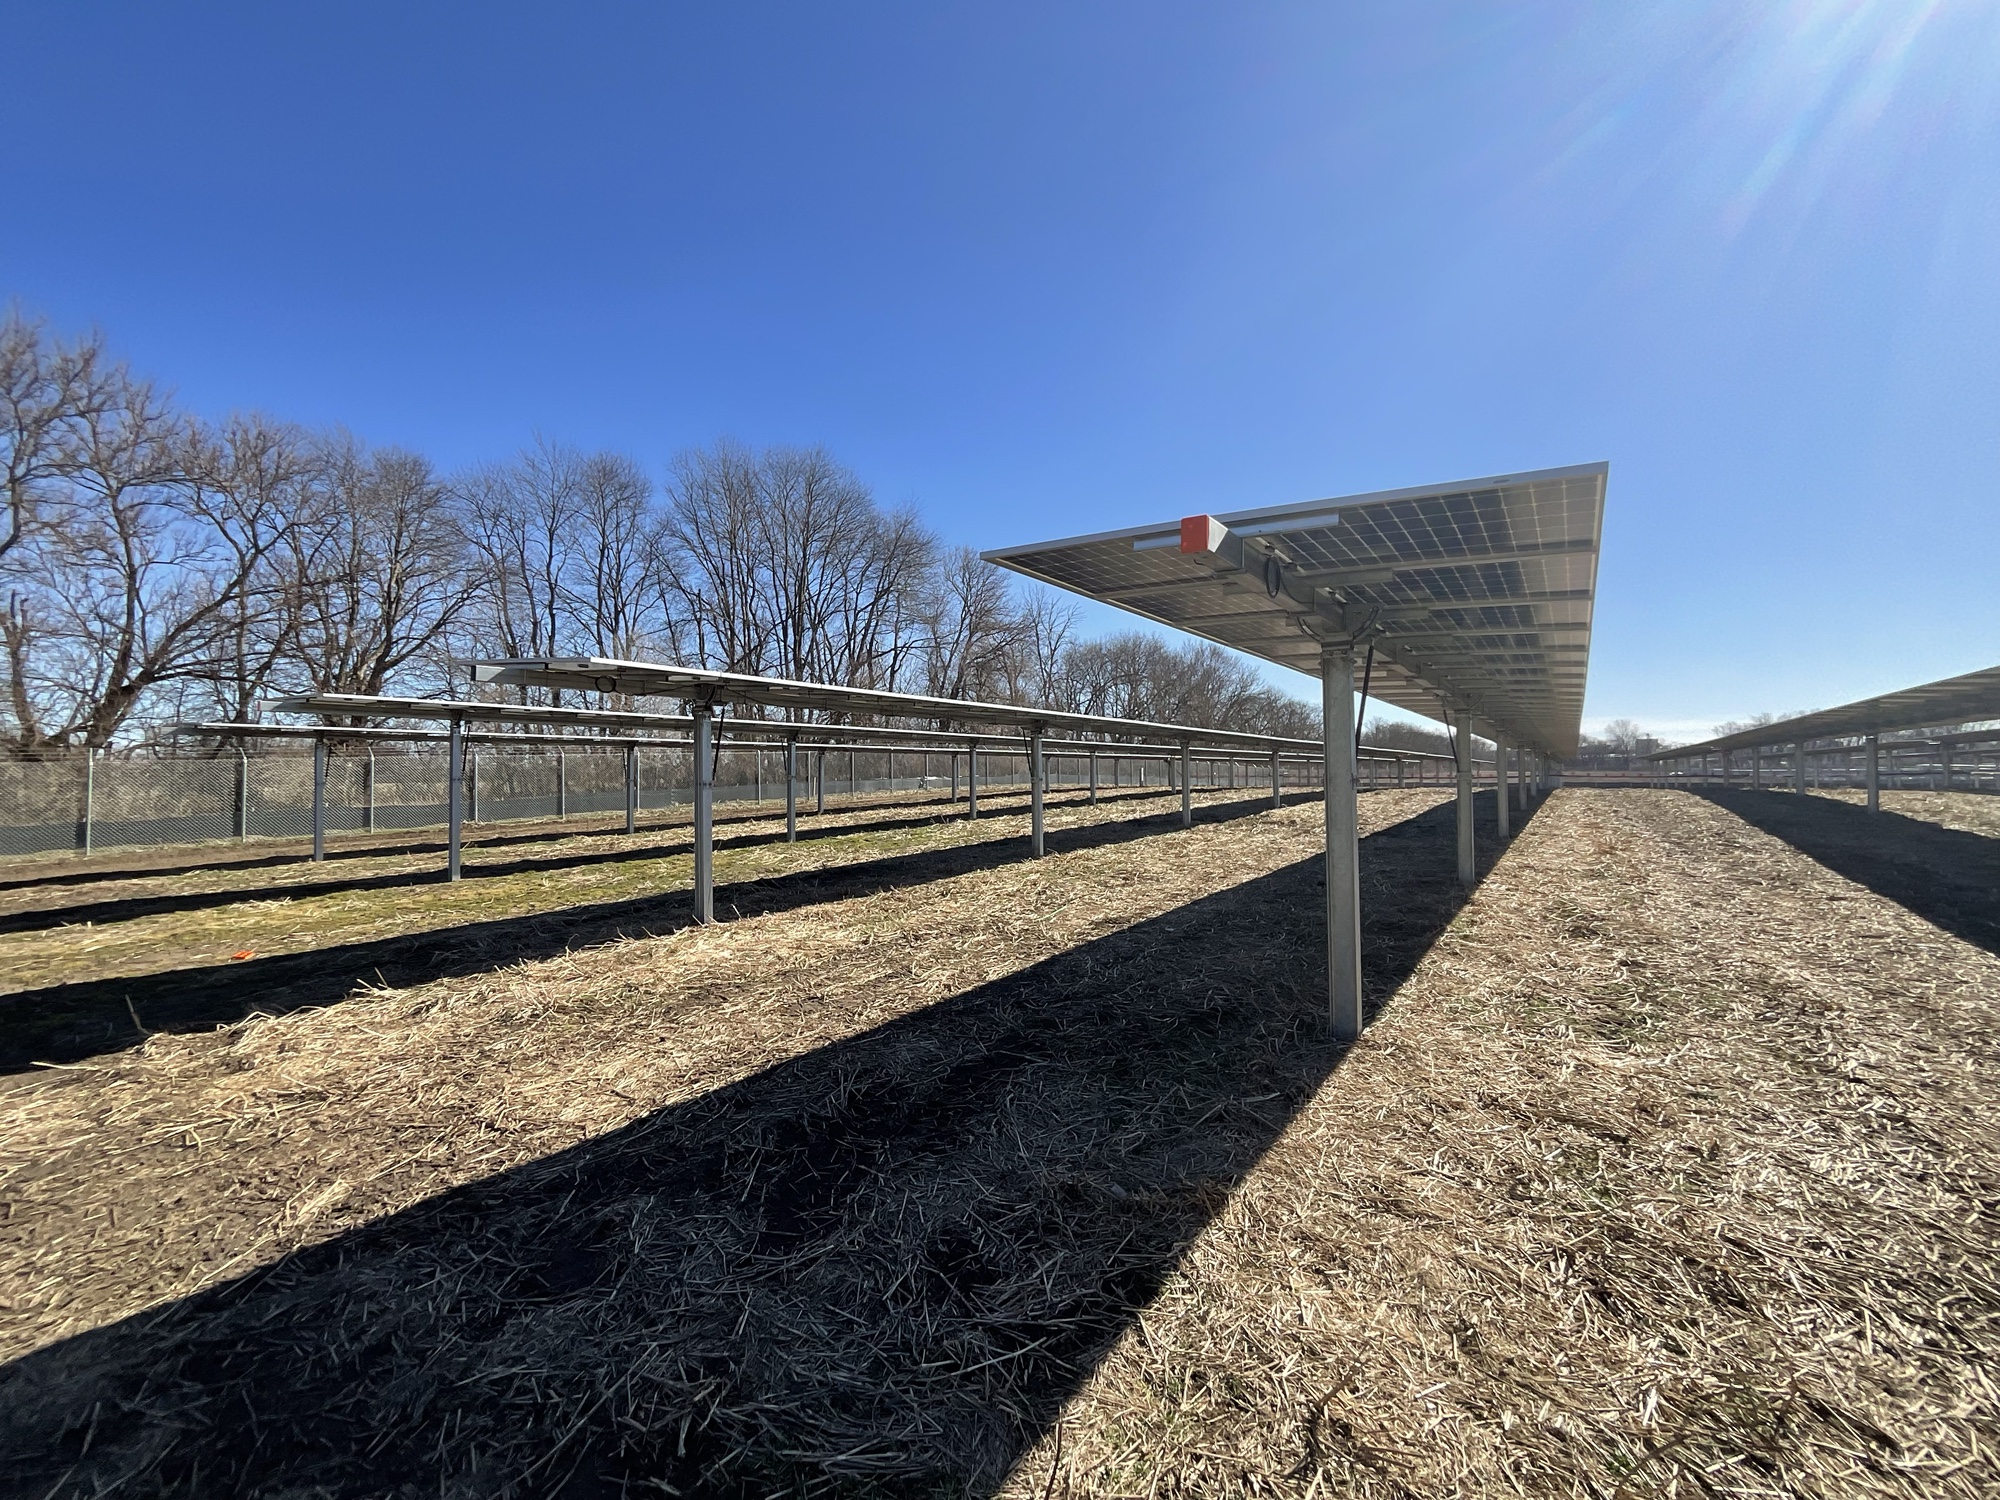 A Summit Ridge Energy community solar project located in Momence, Illinois using domestically manufactured Qcells modules.